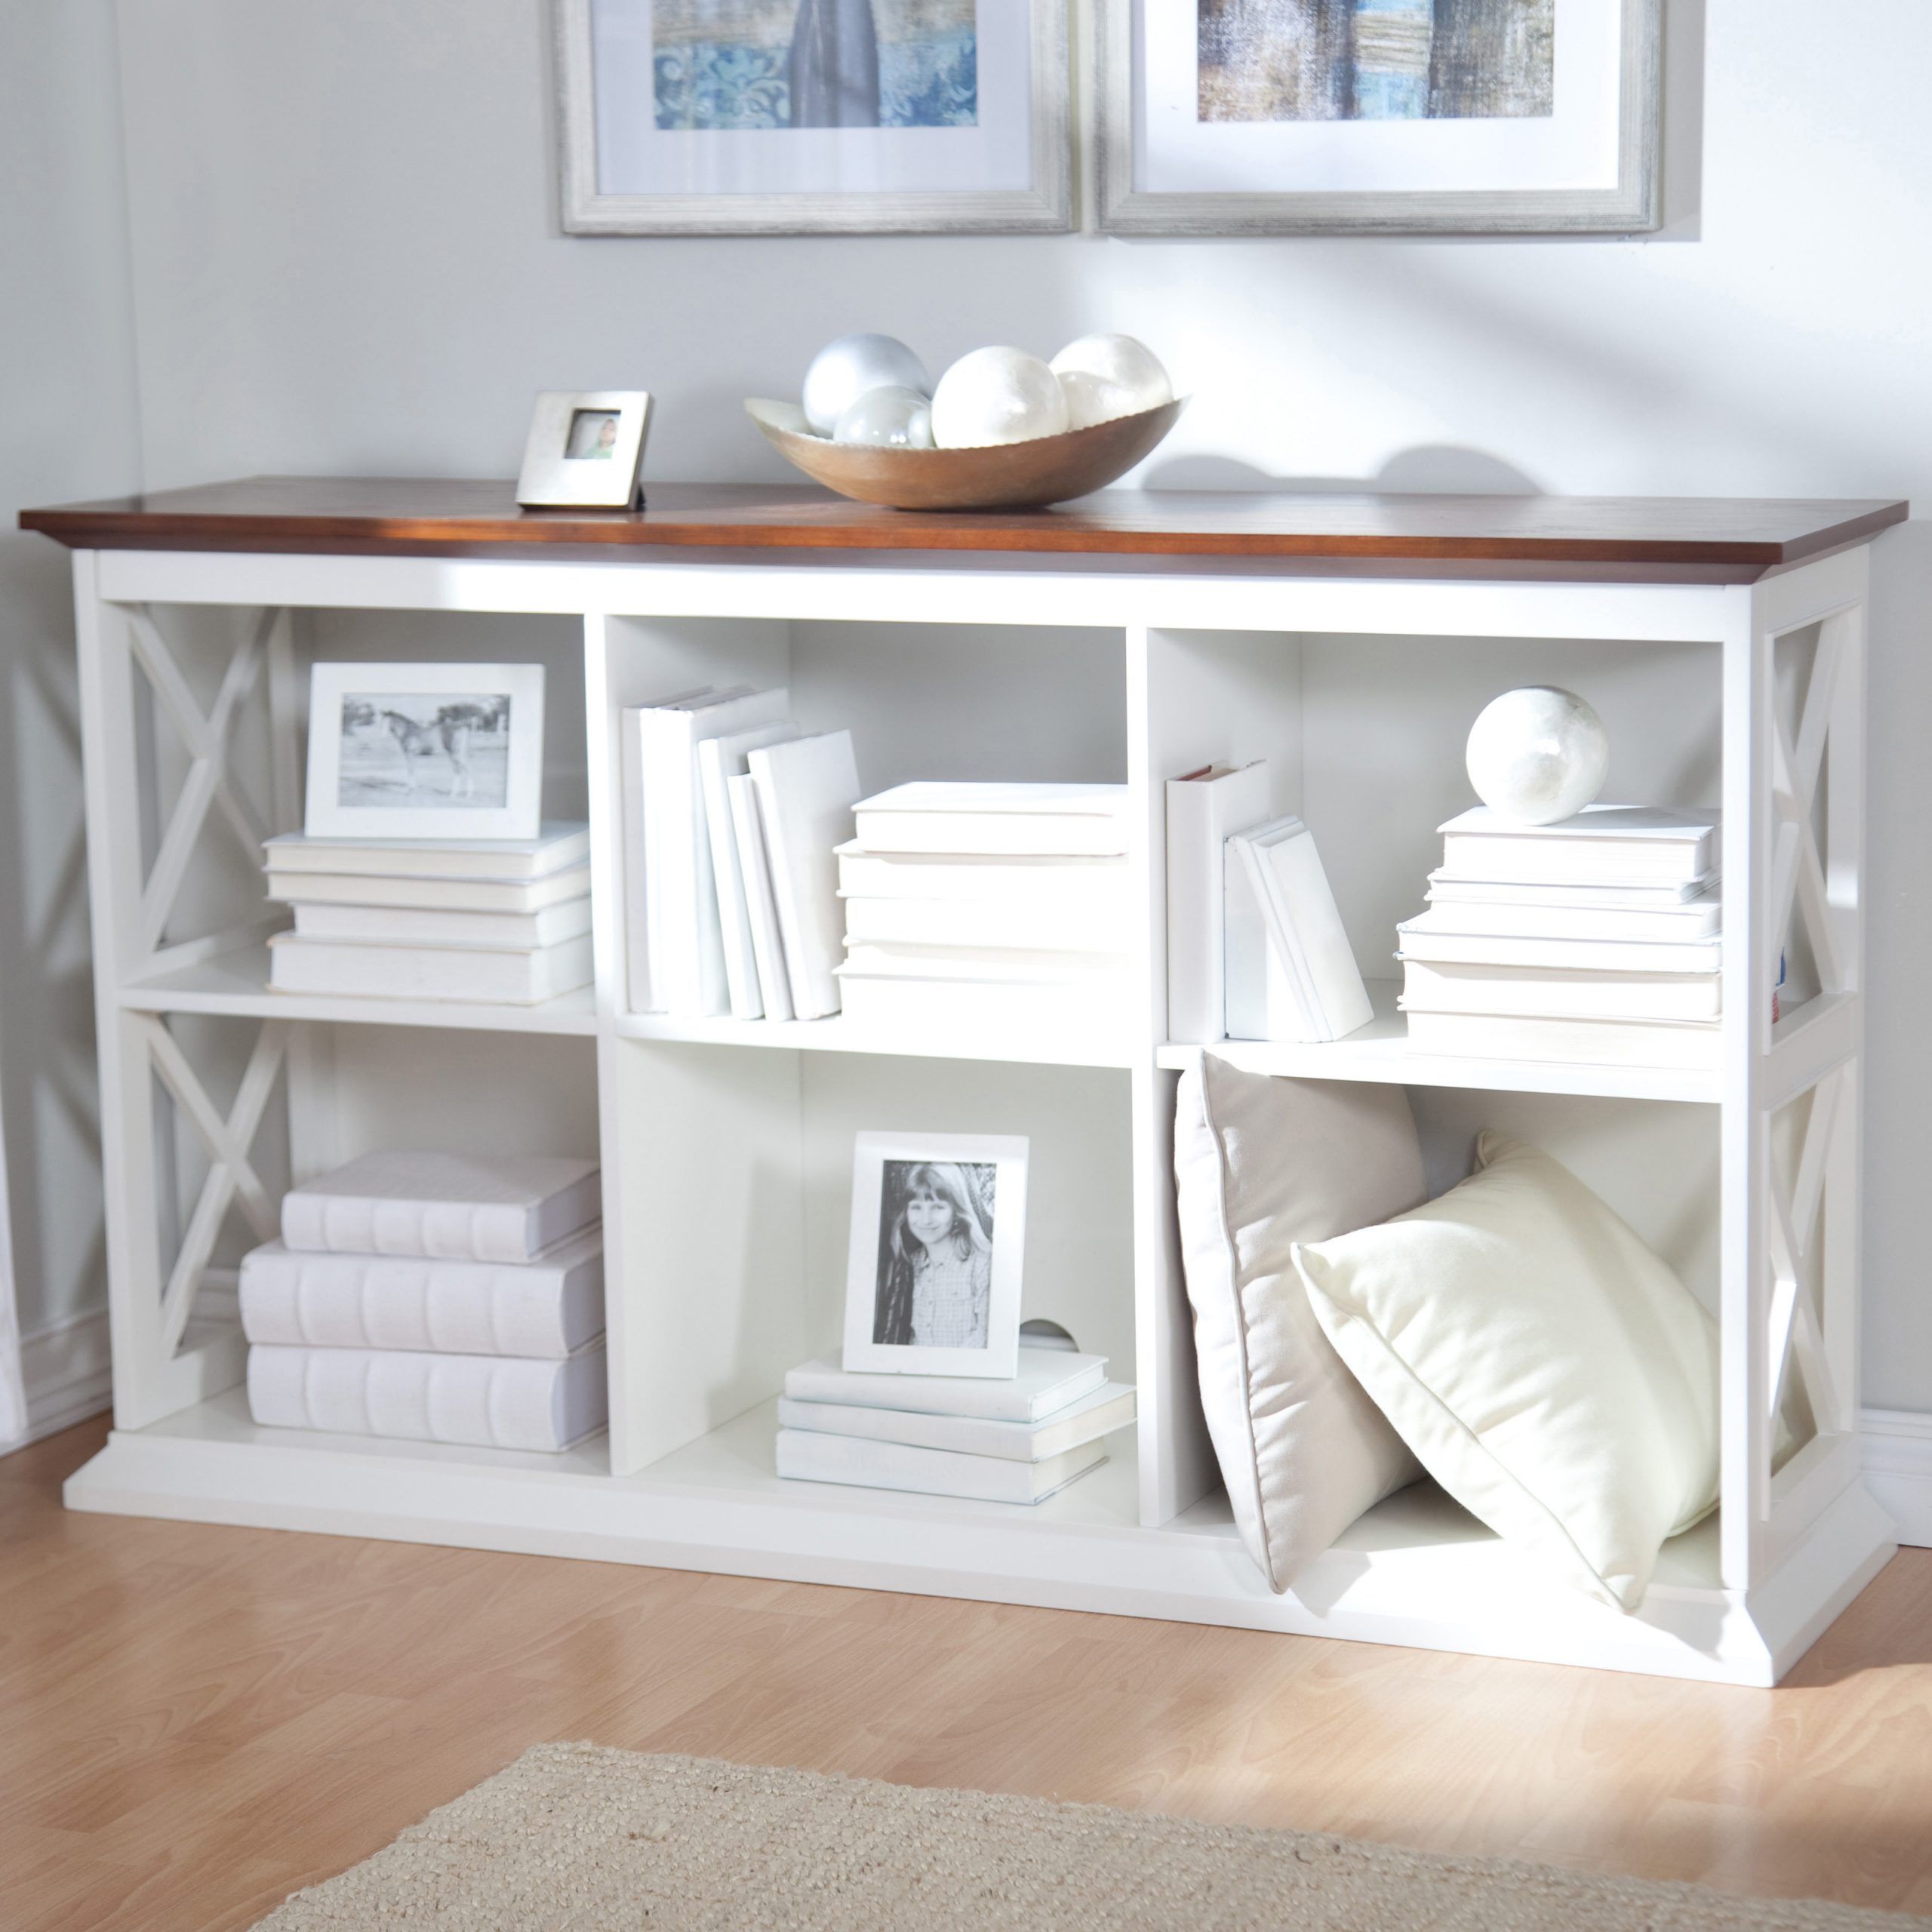 Belham Living Hampton Console Table 2 Shelf Bookcase Within 2 Shelf Console Tables (View 4 of 20)